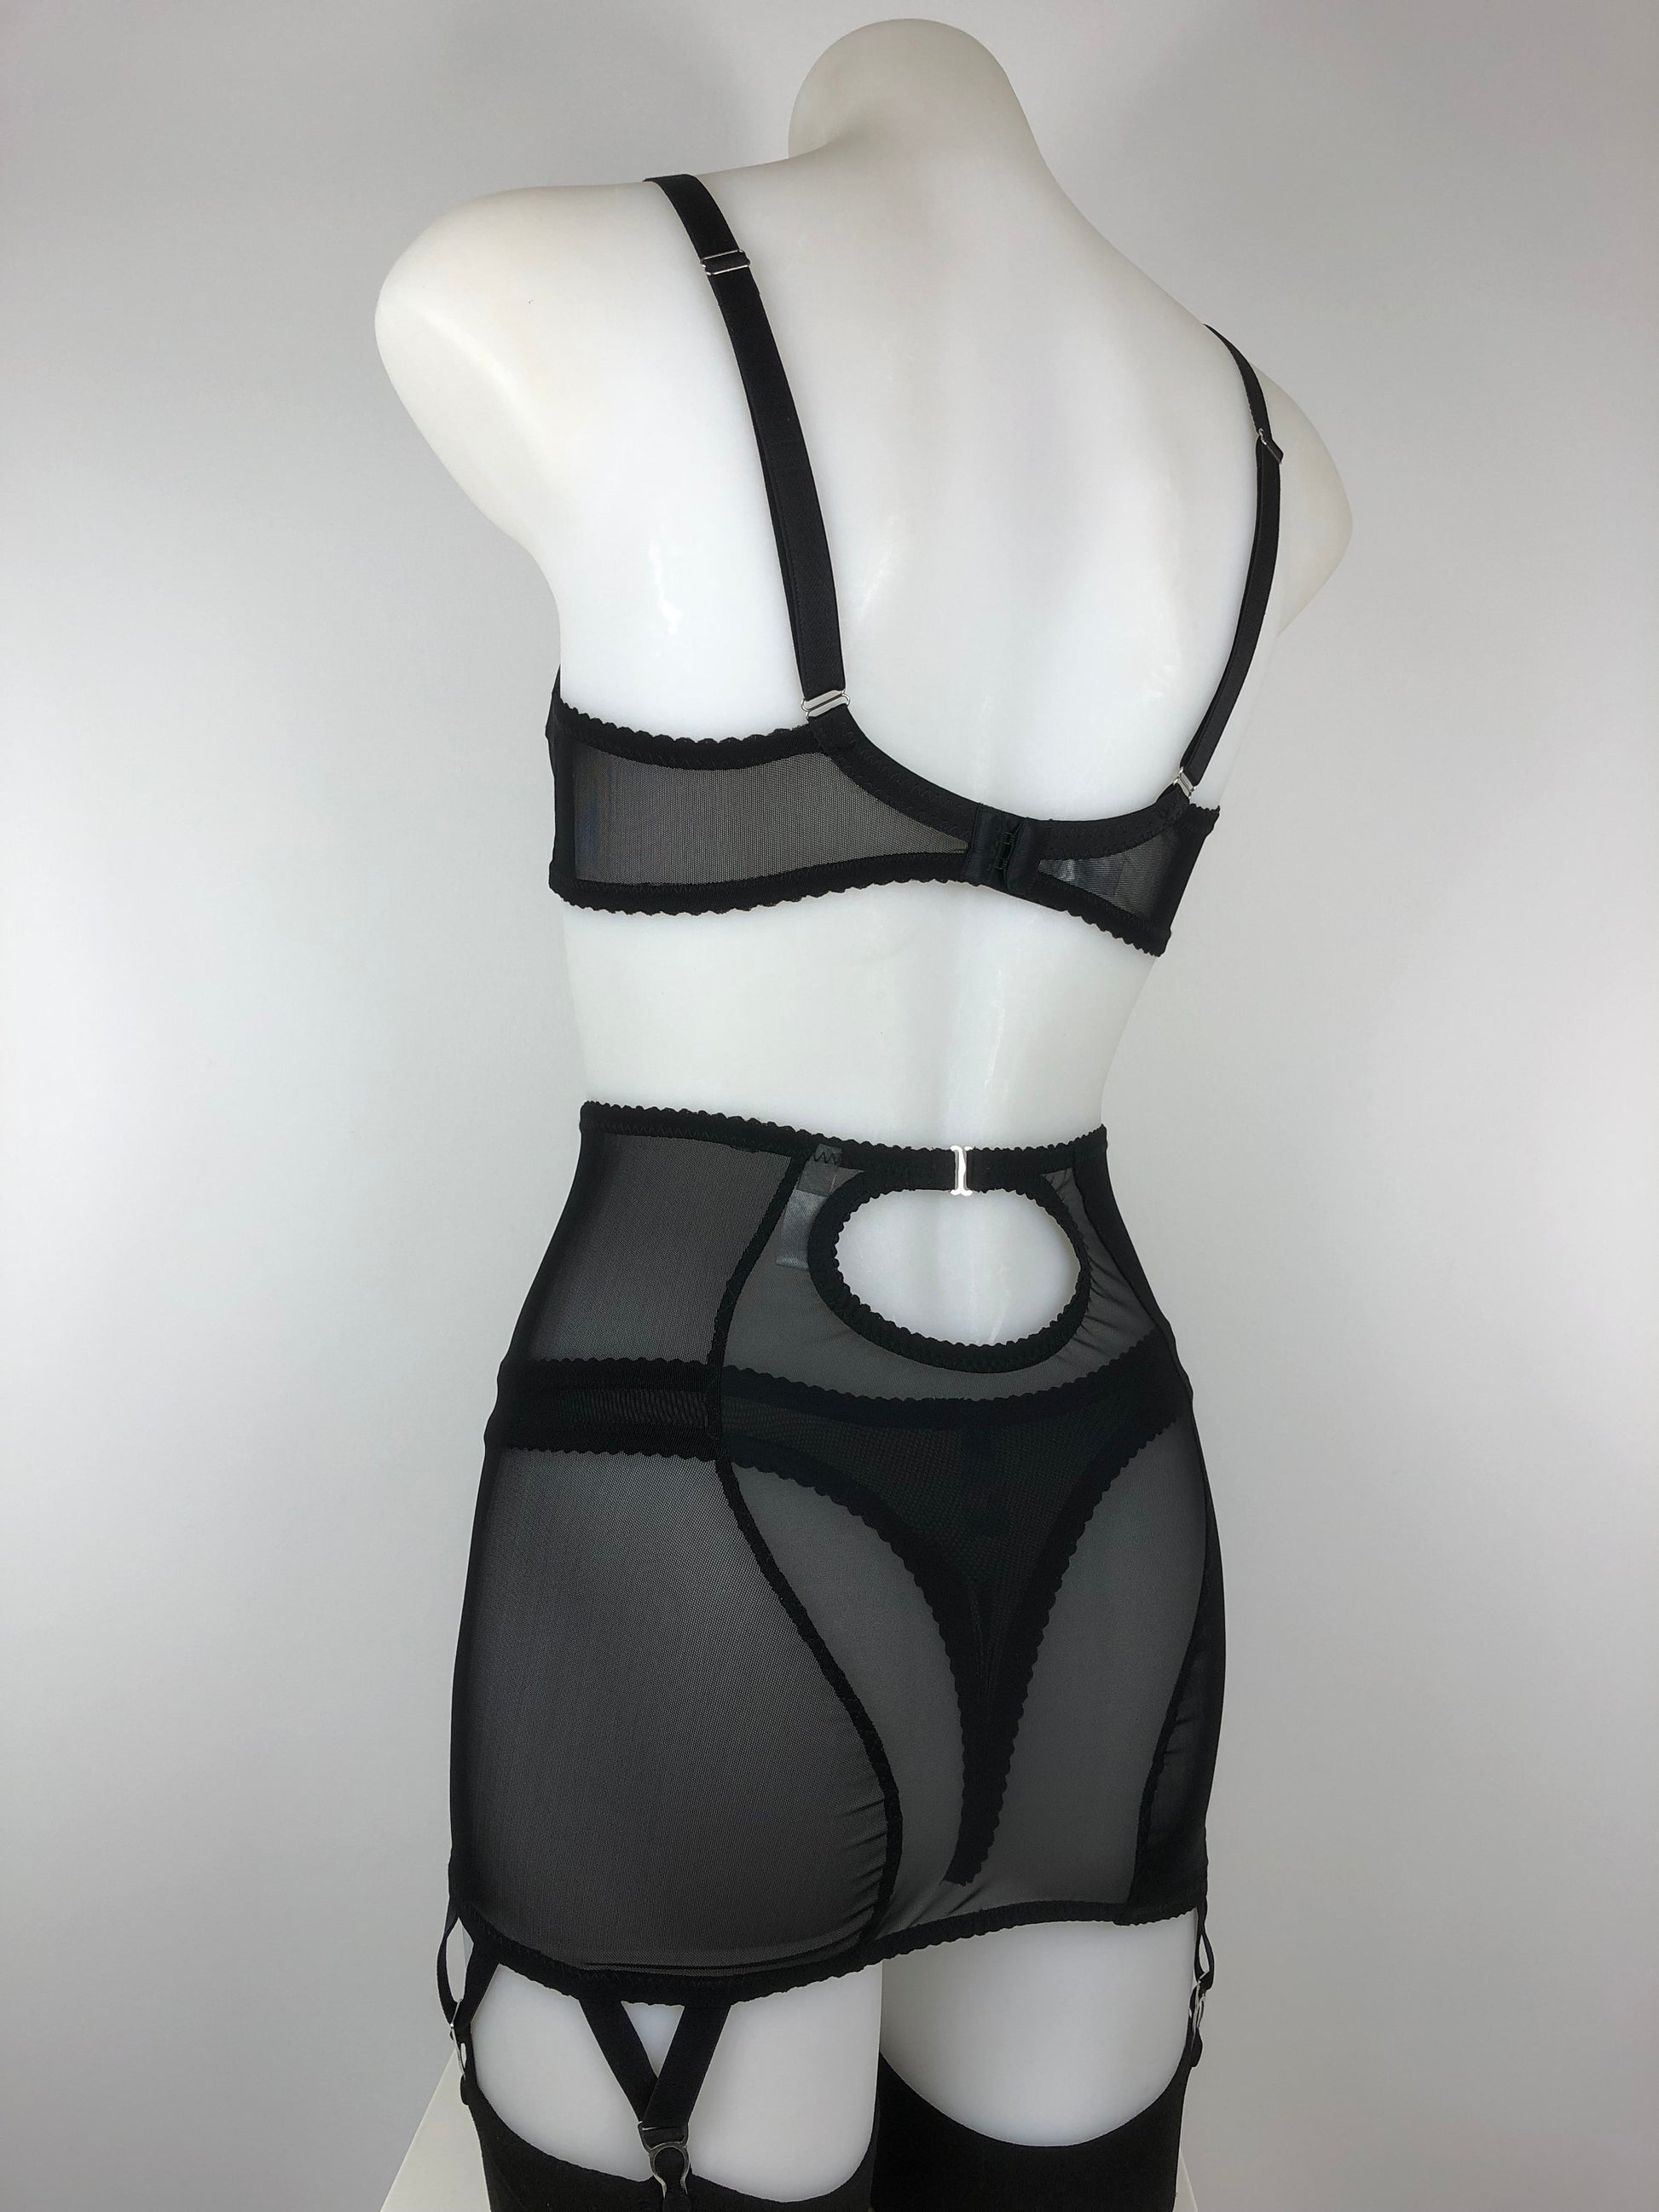 Sheer see through black mesh soft bra bralette, front fastening with two hooks. Transparent fetish bettie page inspired lingerie underwear. Longline girdle and Girdlette and corselette also available